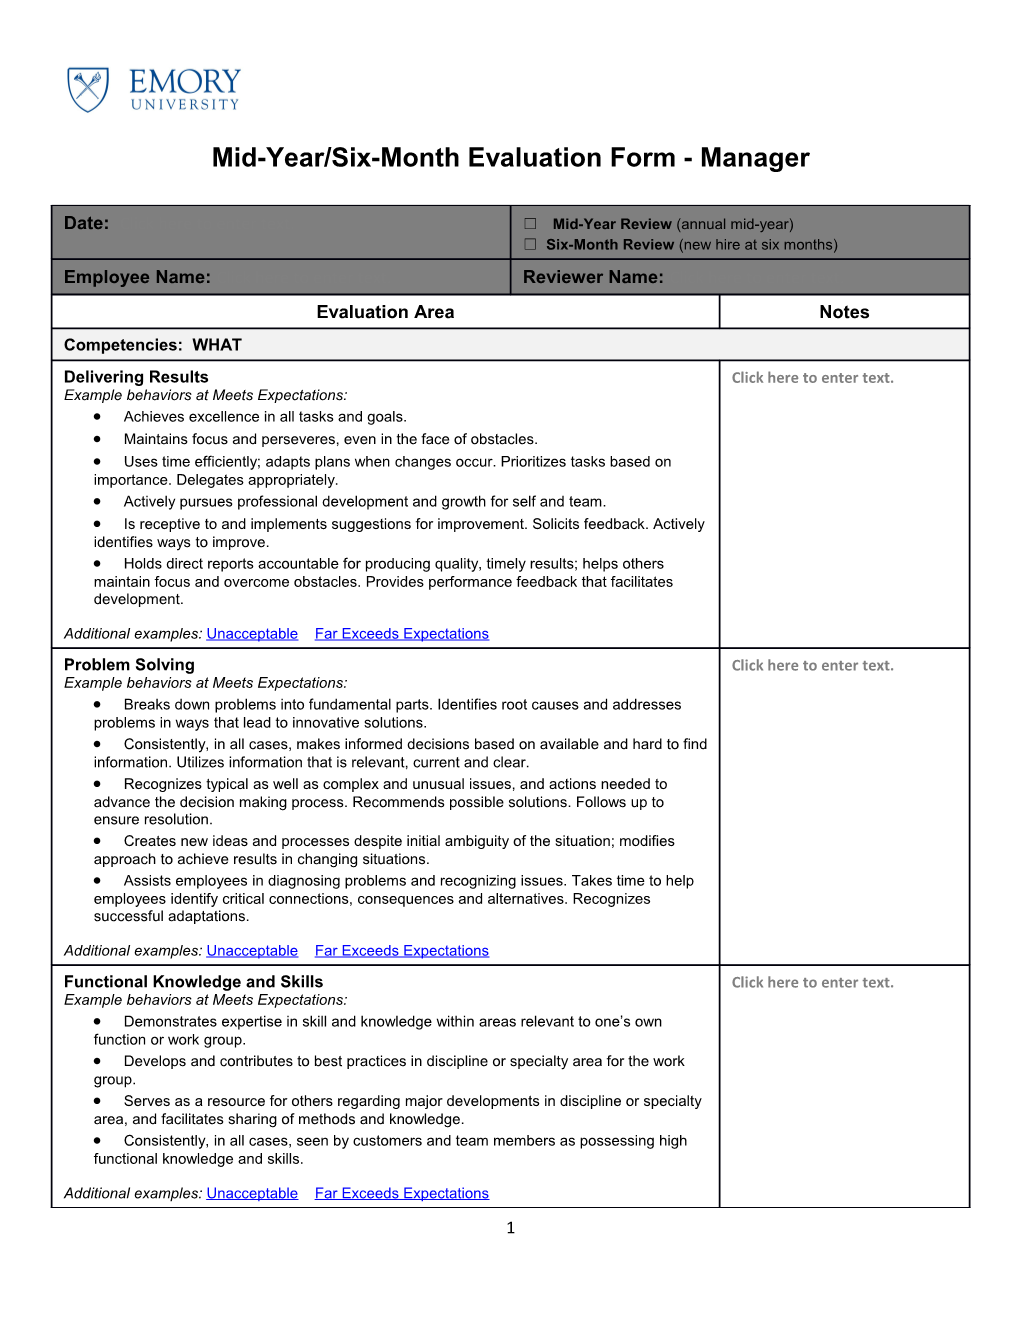 Mid-Year/Six-Month Evaluation Form - Manager